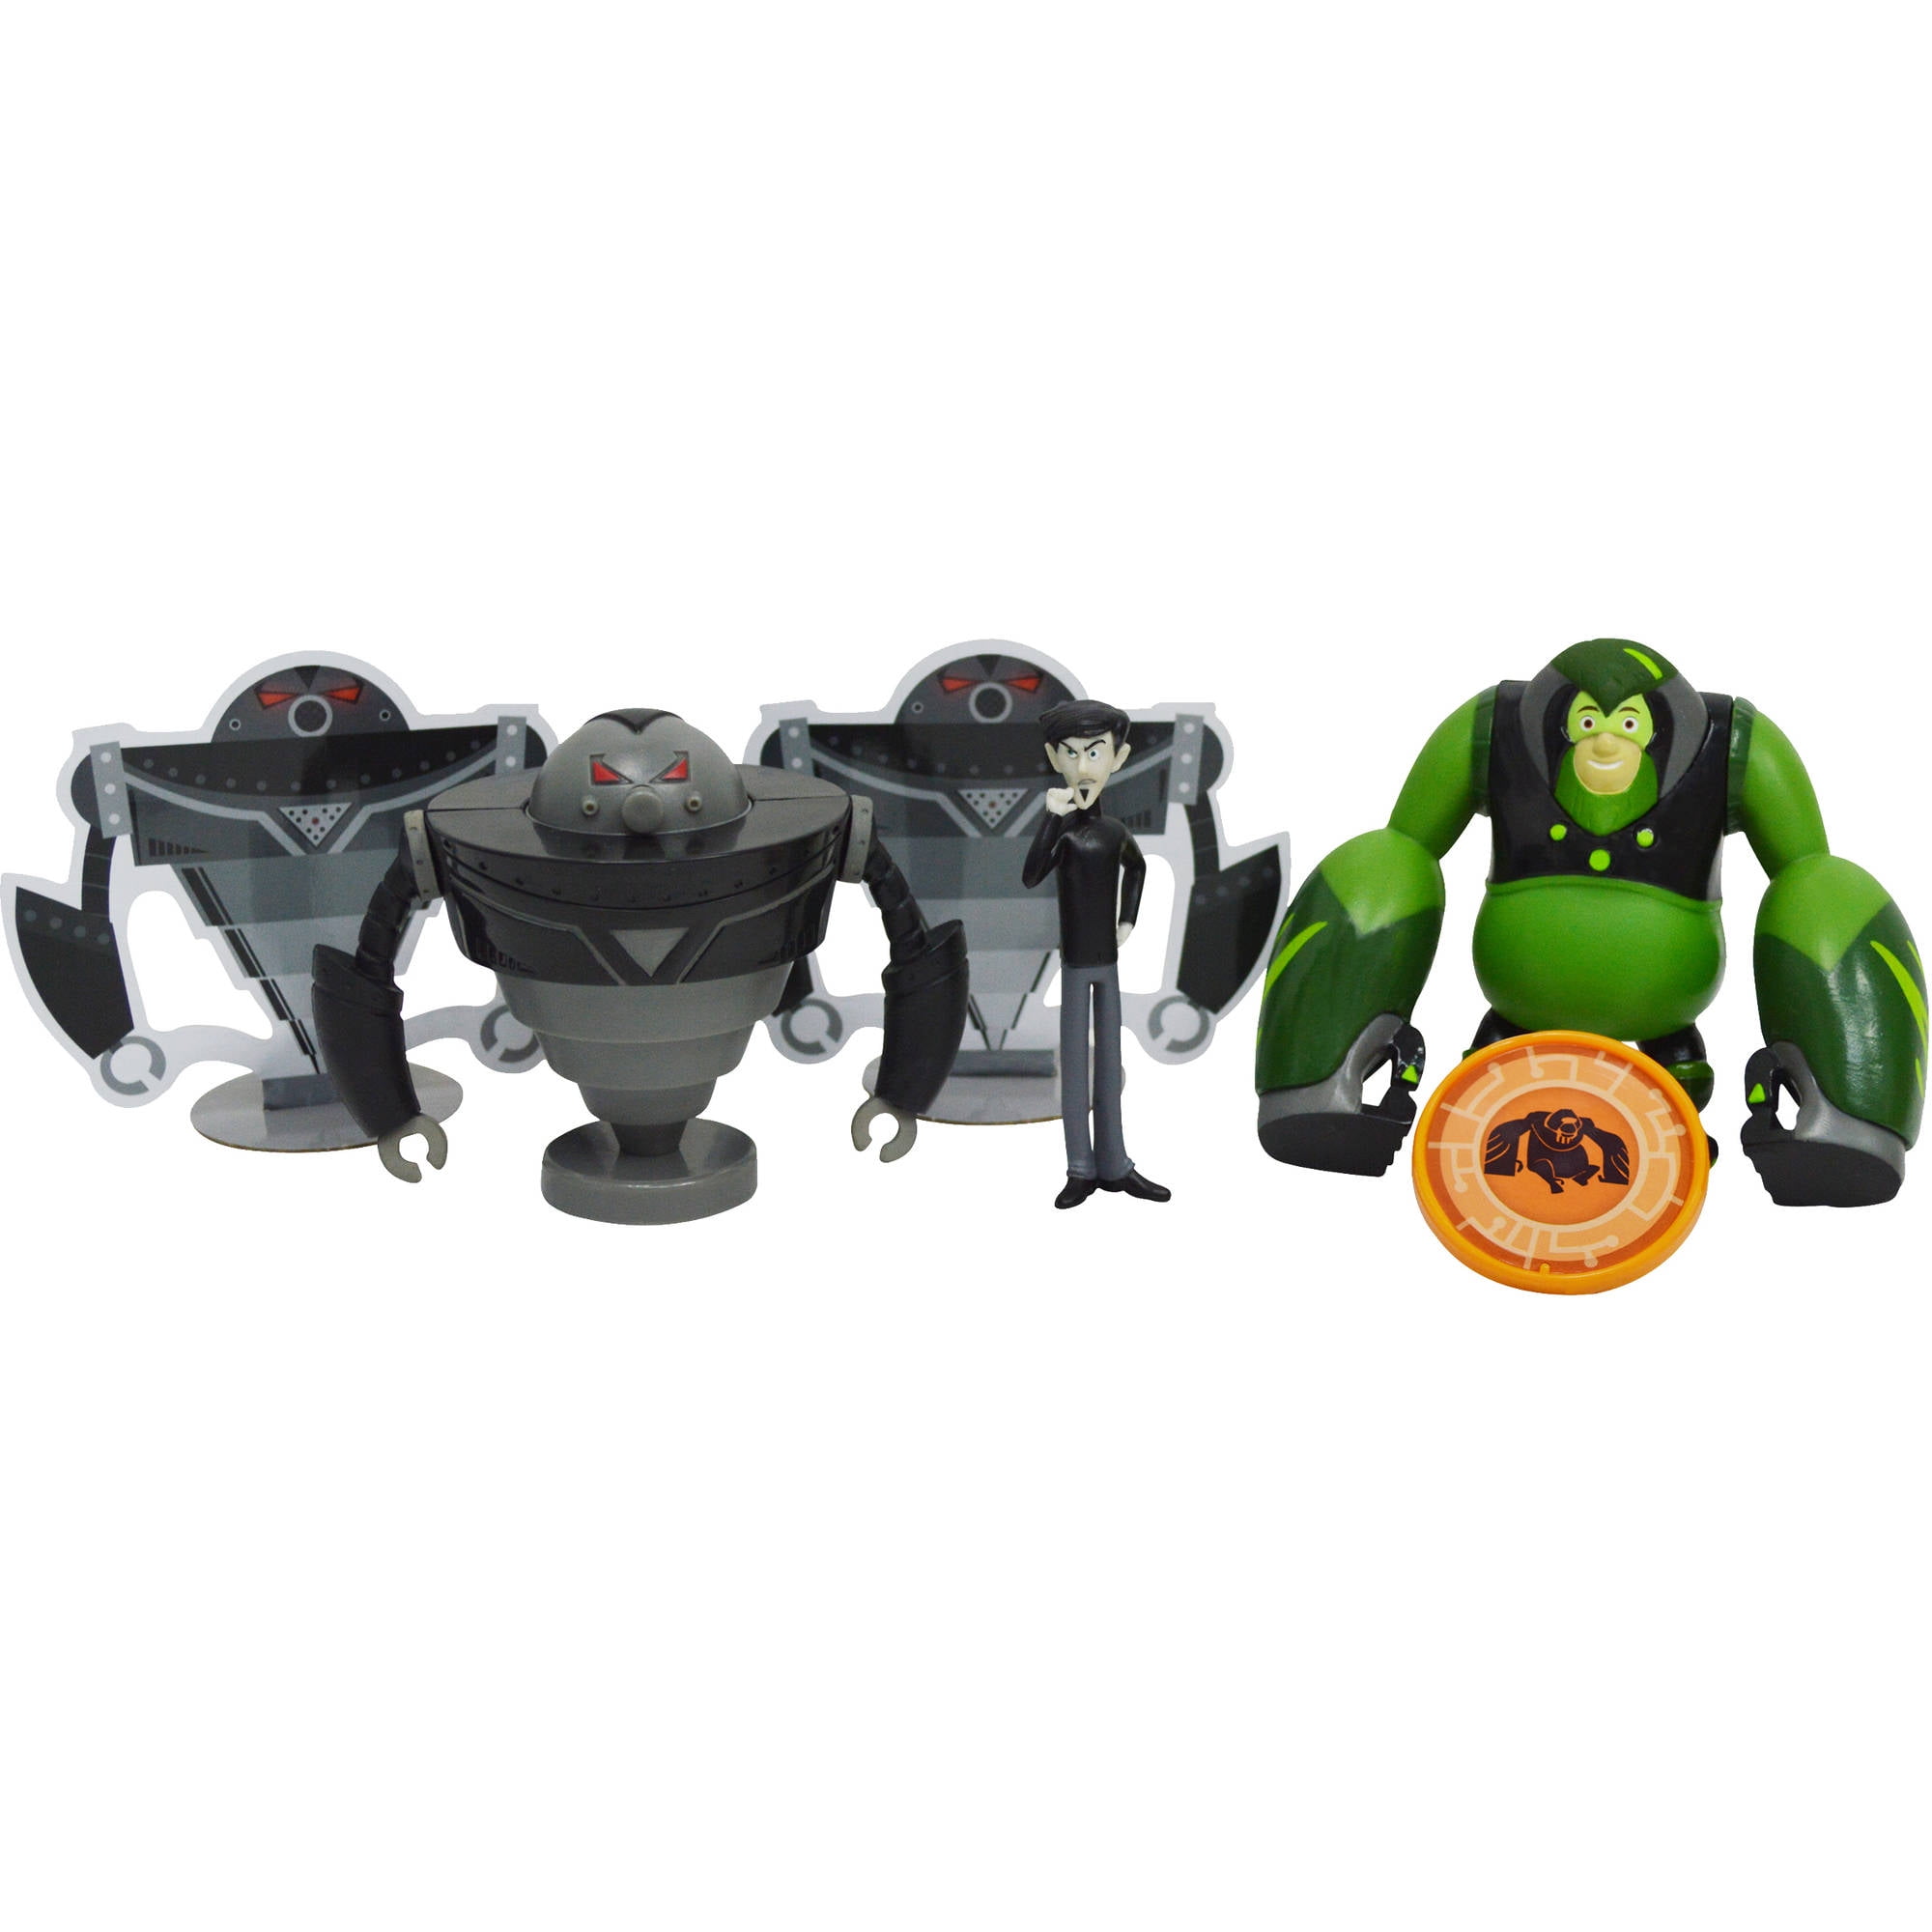 Swimmers Activate Creature Power Wild Kratts 4-Pack Action Figure Set 